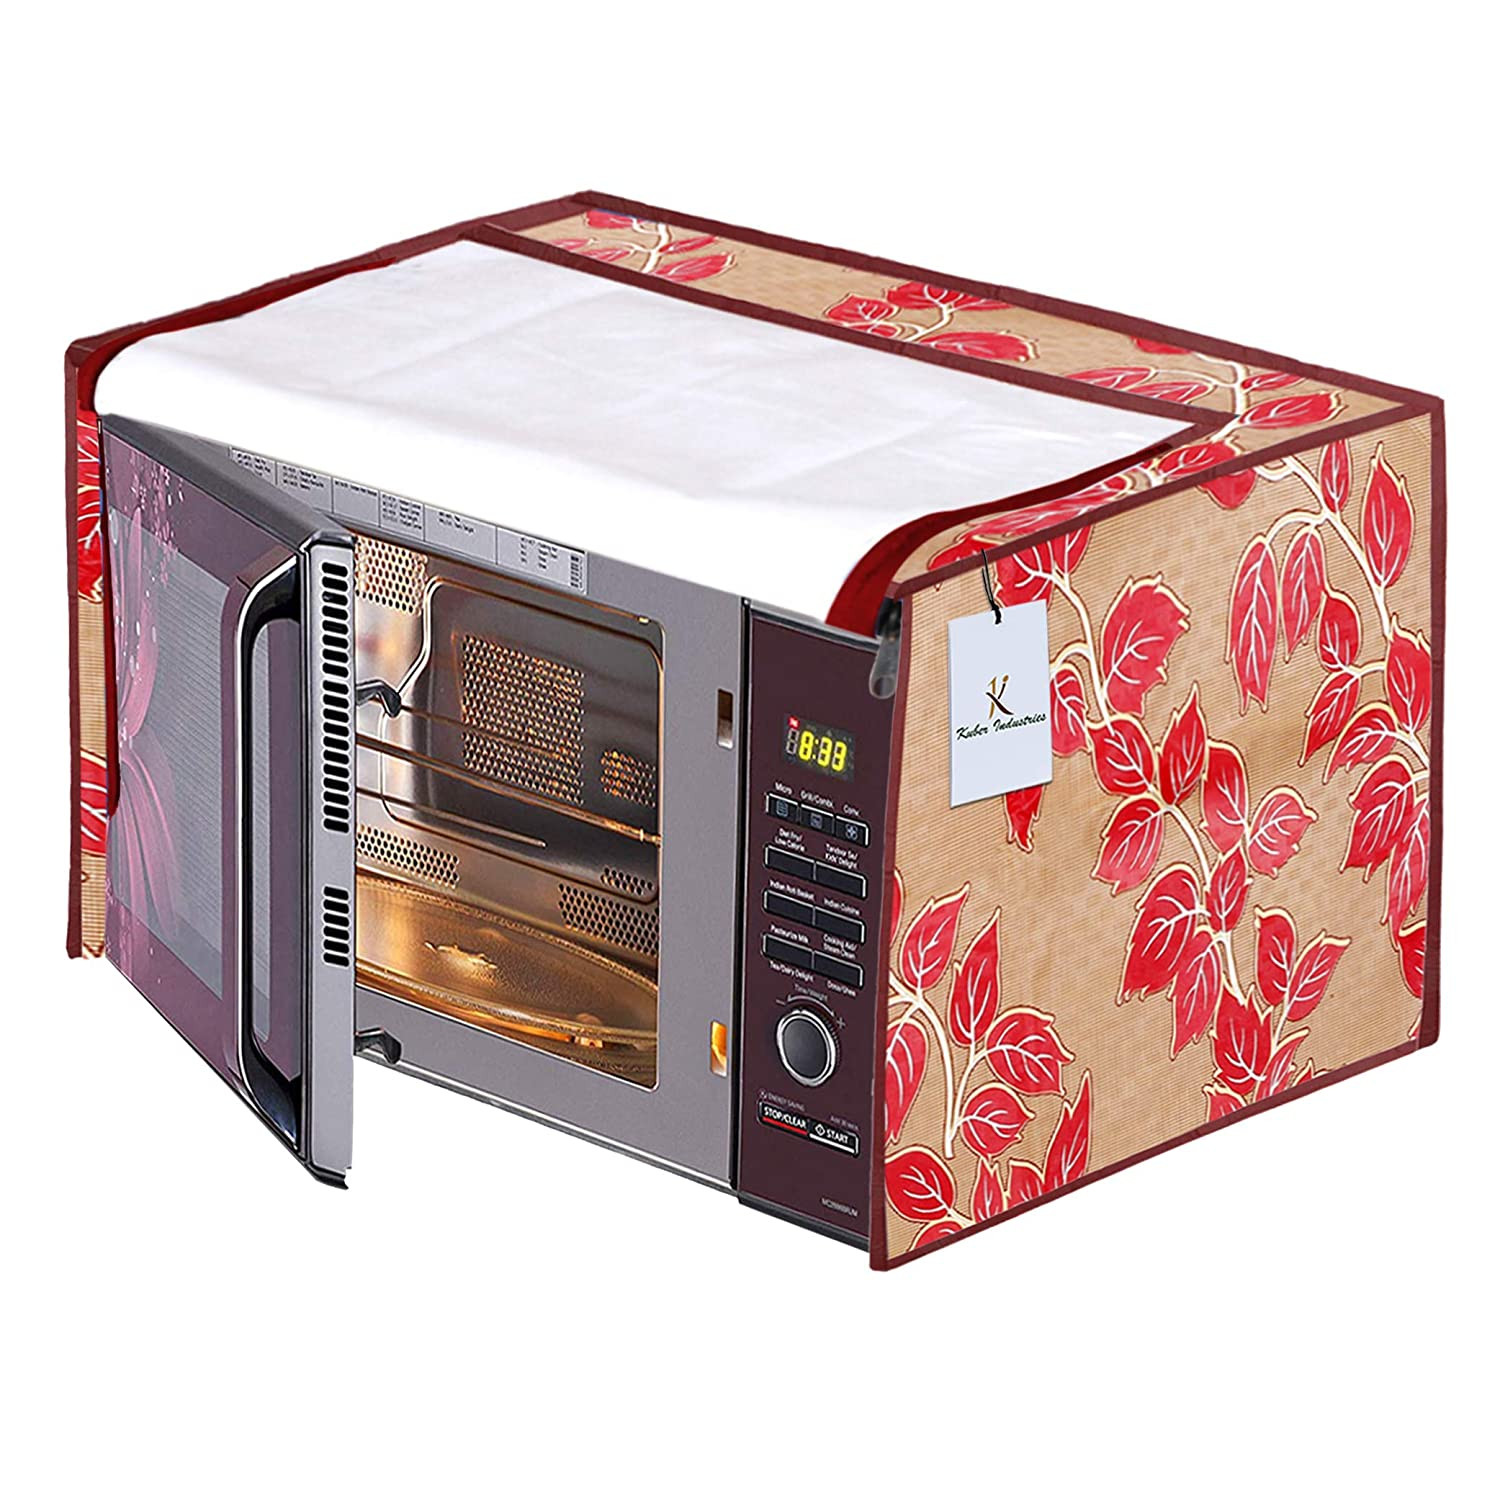 Kuber Industries PVC Leaf Printed Microwave Oven Cover,25 Ltr. (Red)-HS43KUBMART25957